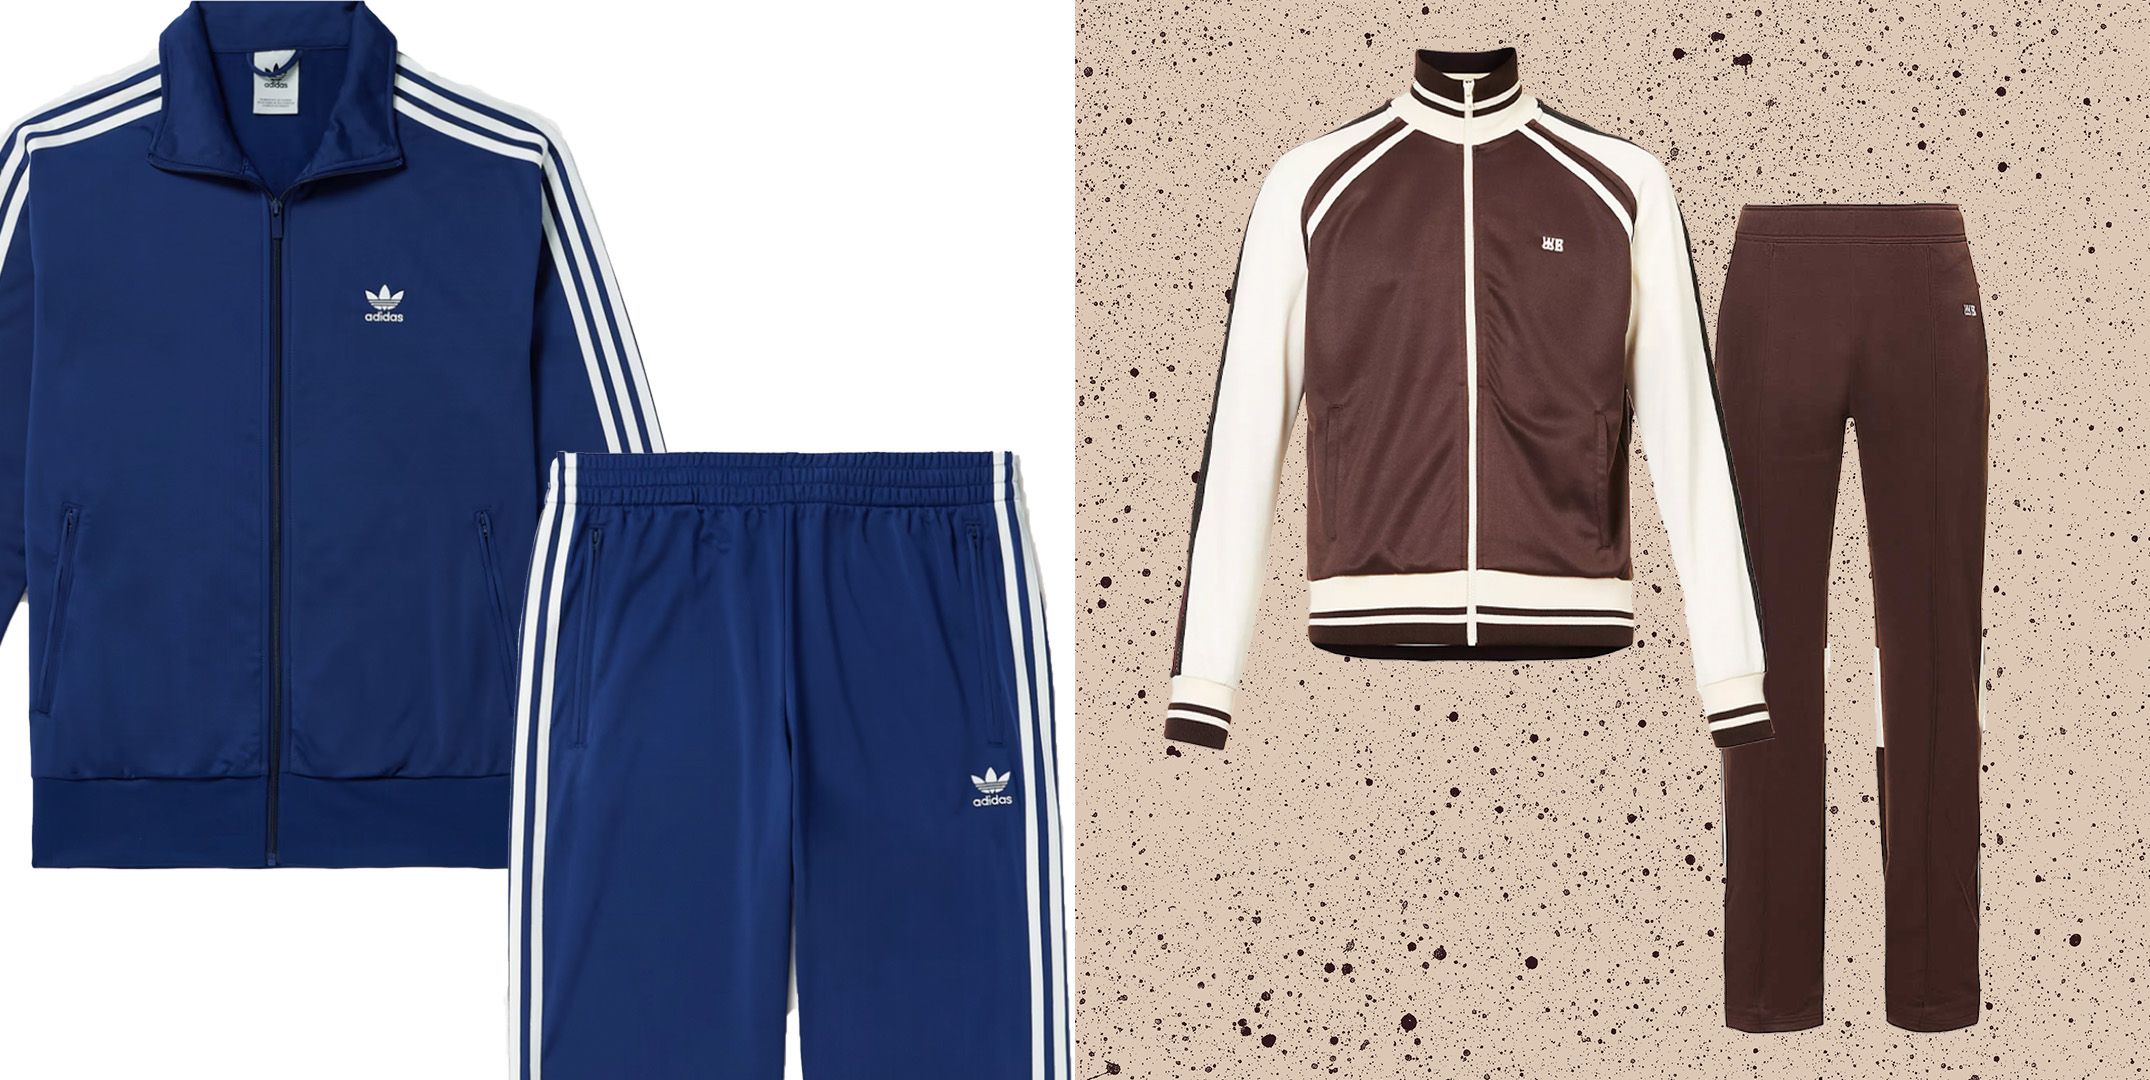 The Only Suit You Should Be Wearing This Fall Is a Tracksuit